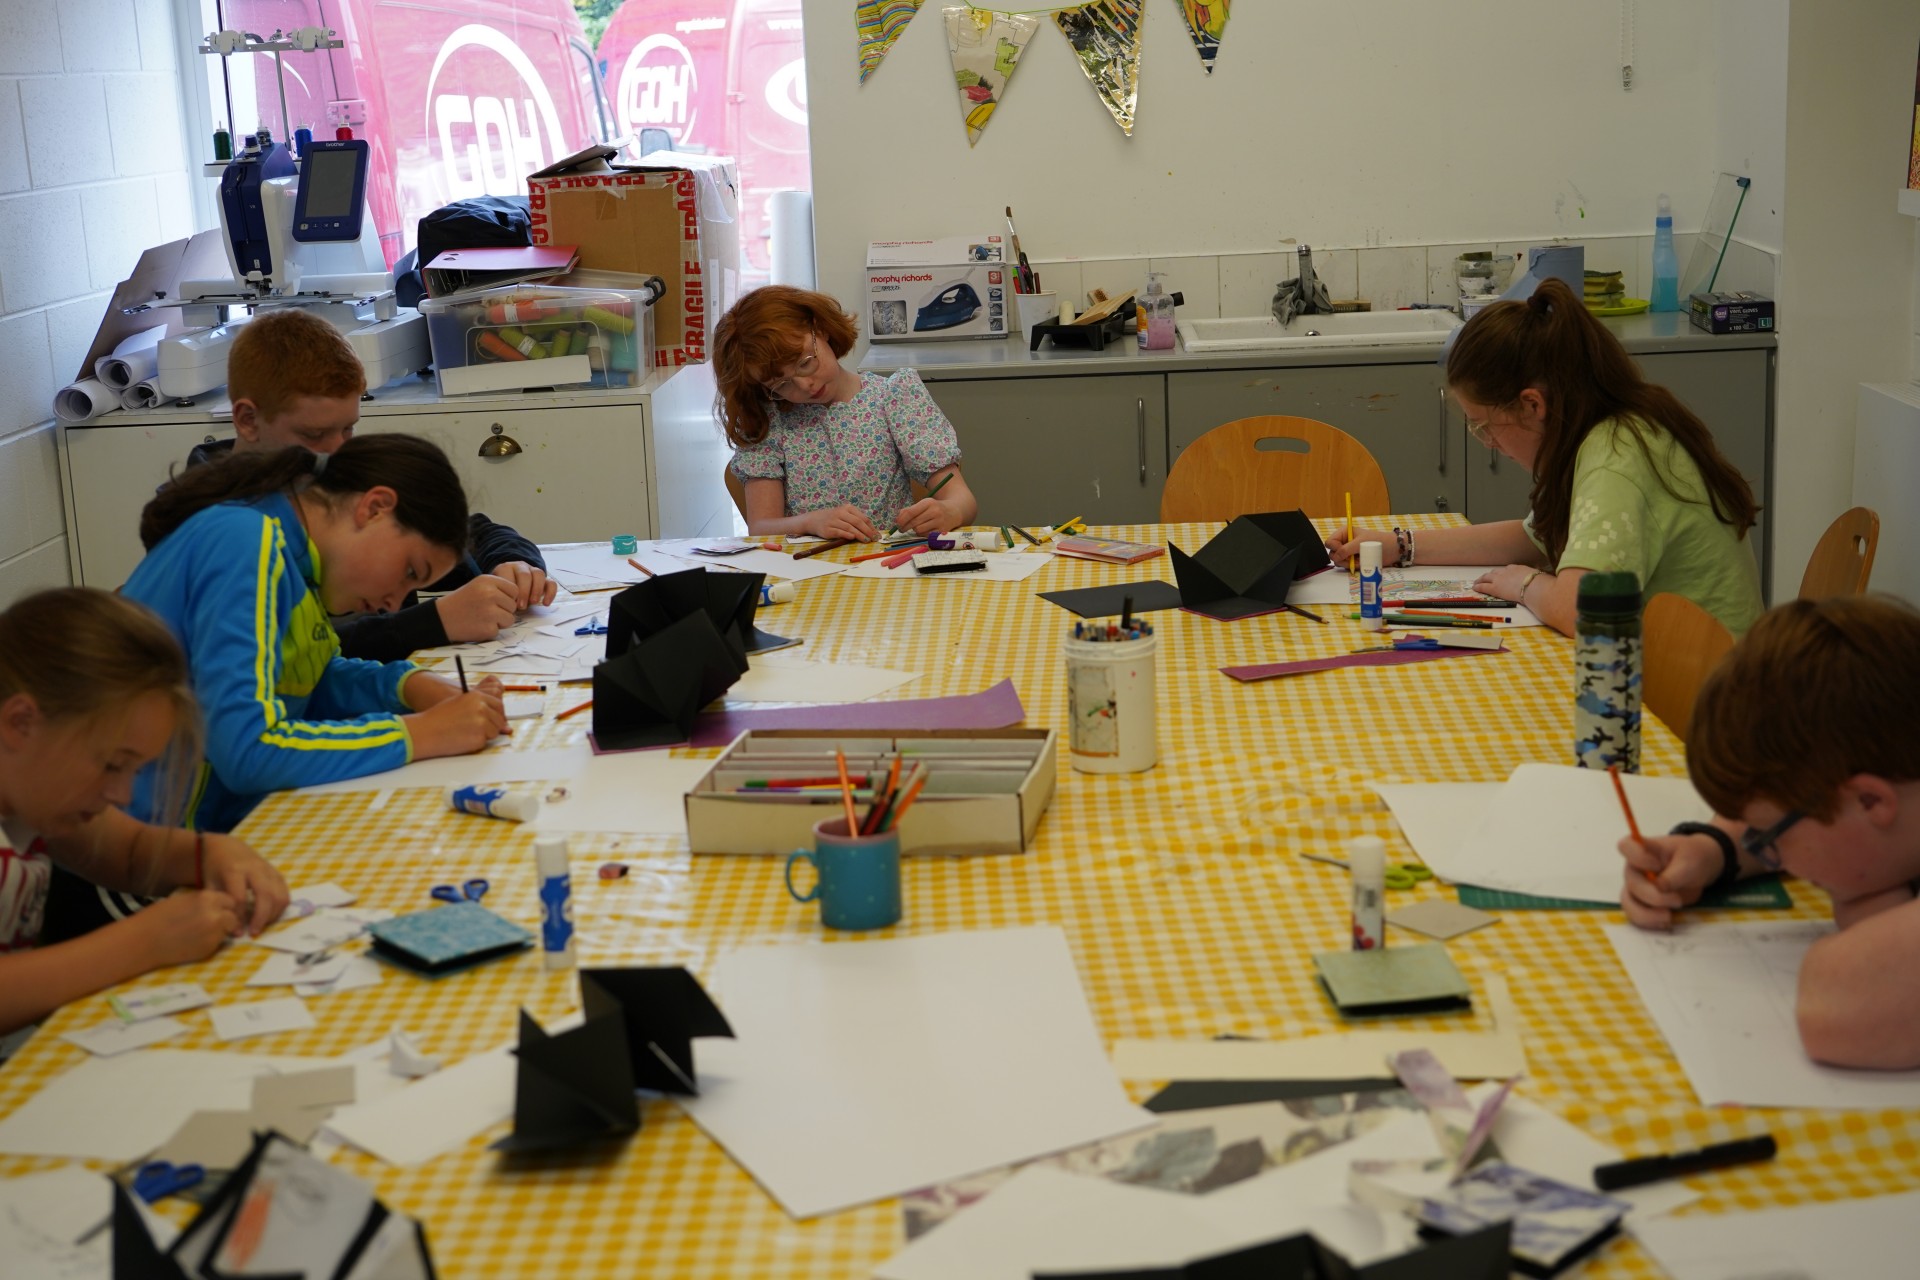 Introduction to Printmaking 24 January 2019